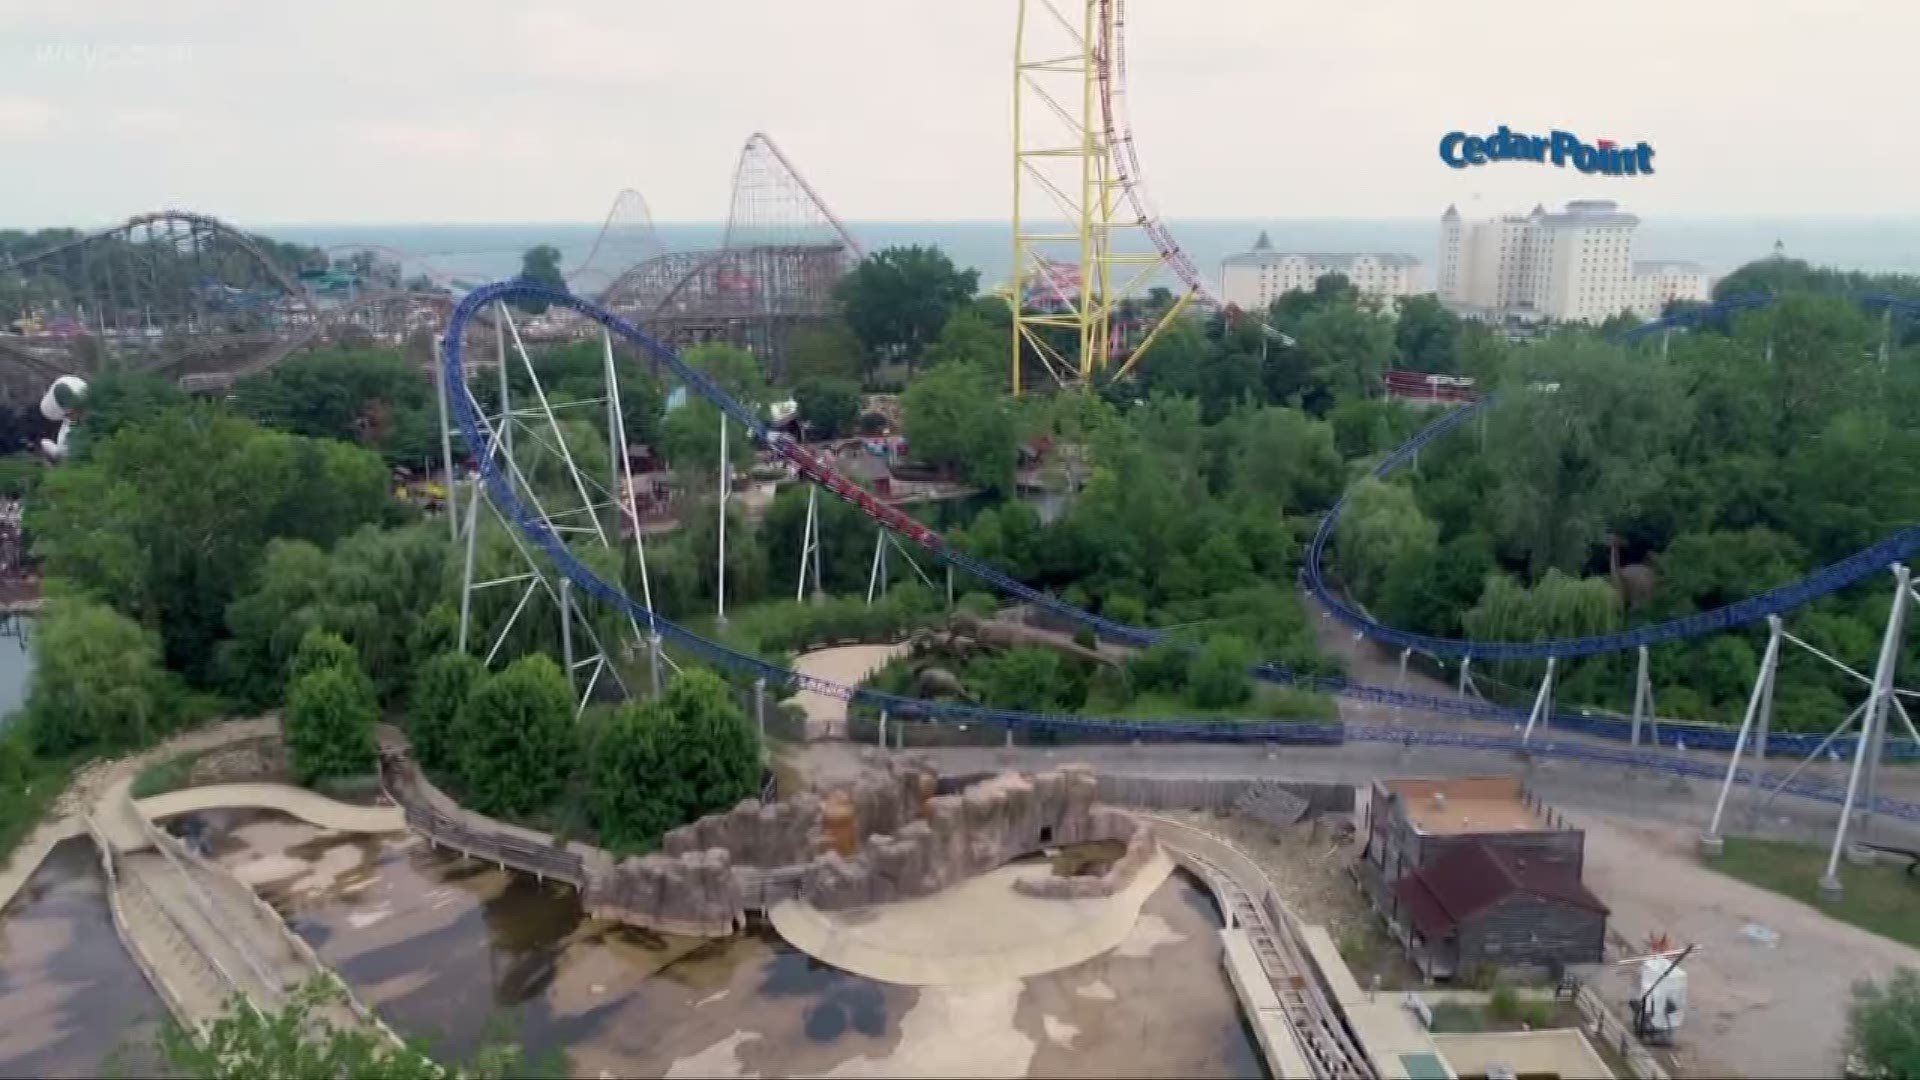 A report from Reuters said Six Flags approached Cedar Fair with a 'merger offer.' Details are currently unknown.